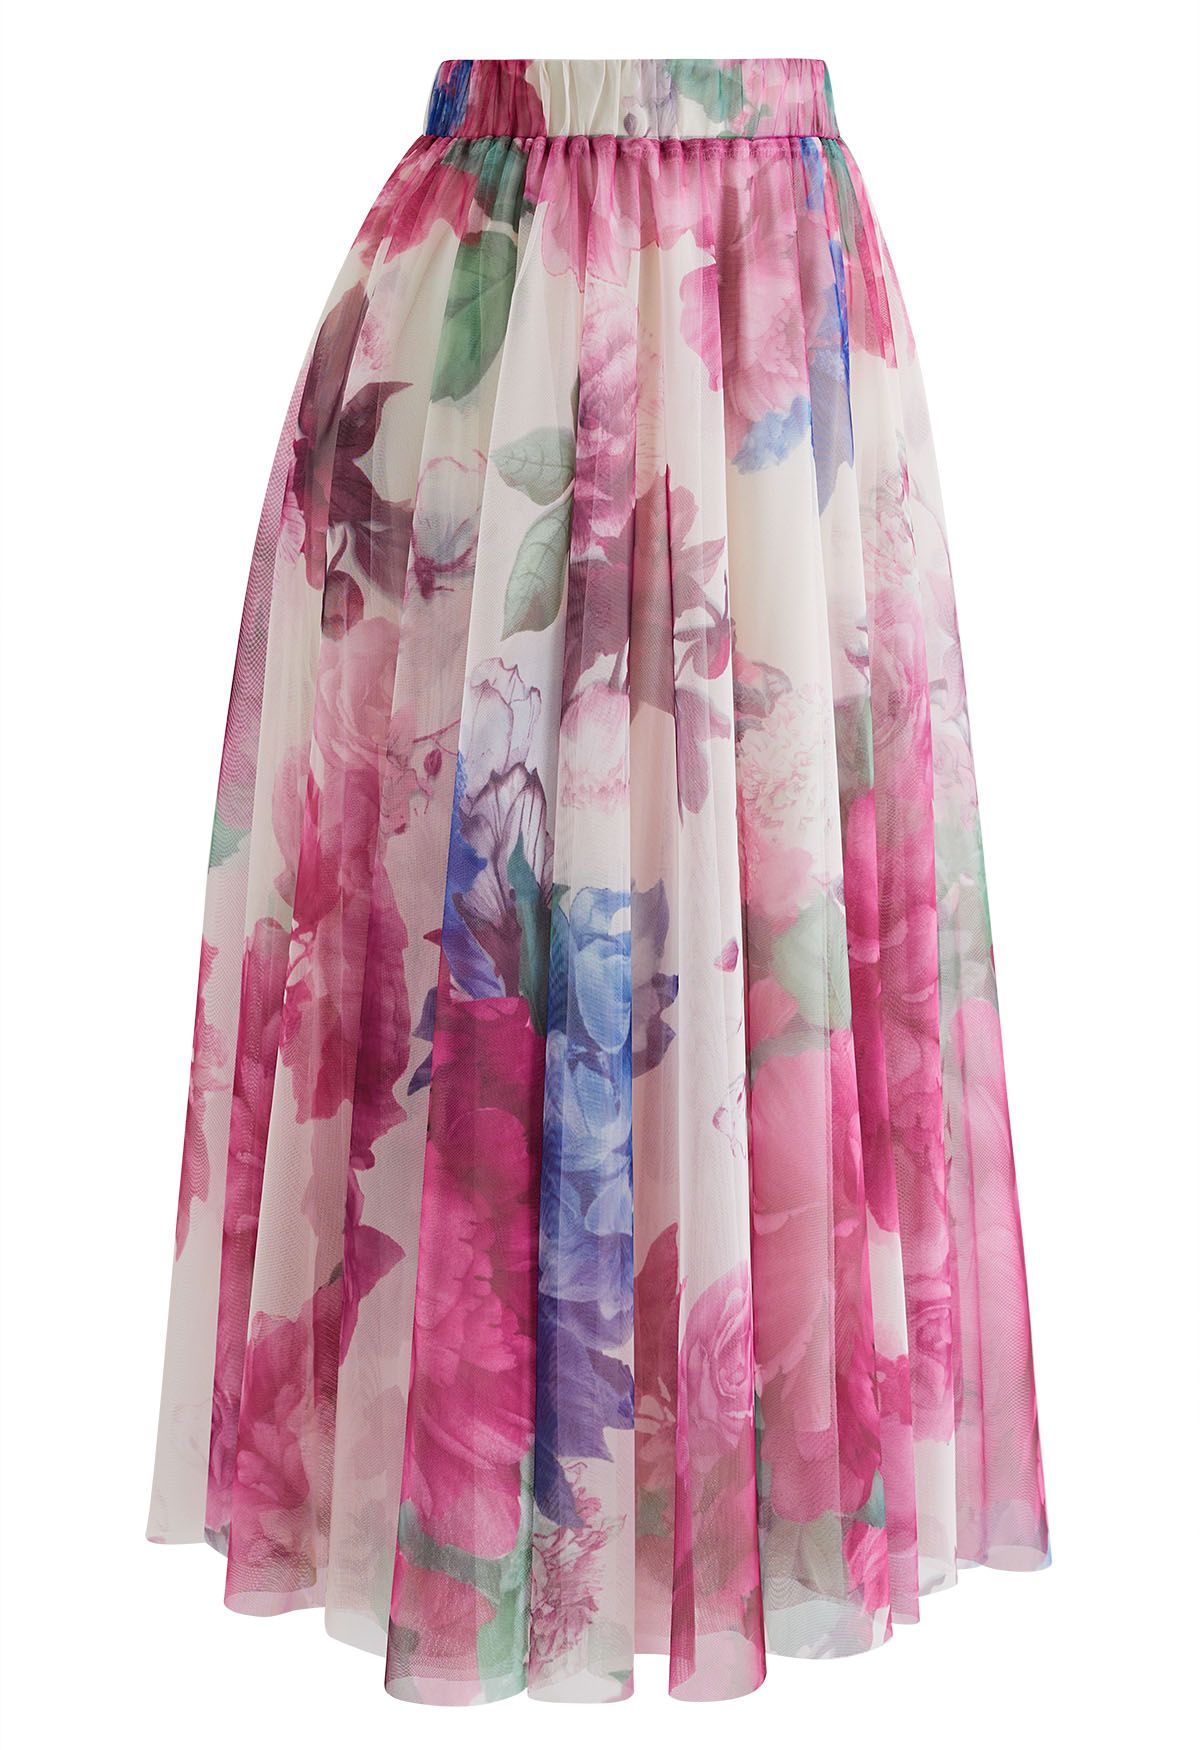 Dancing in Flowers Double-Layered Mesh Tulle Skirt